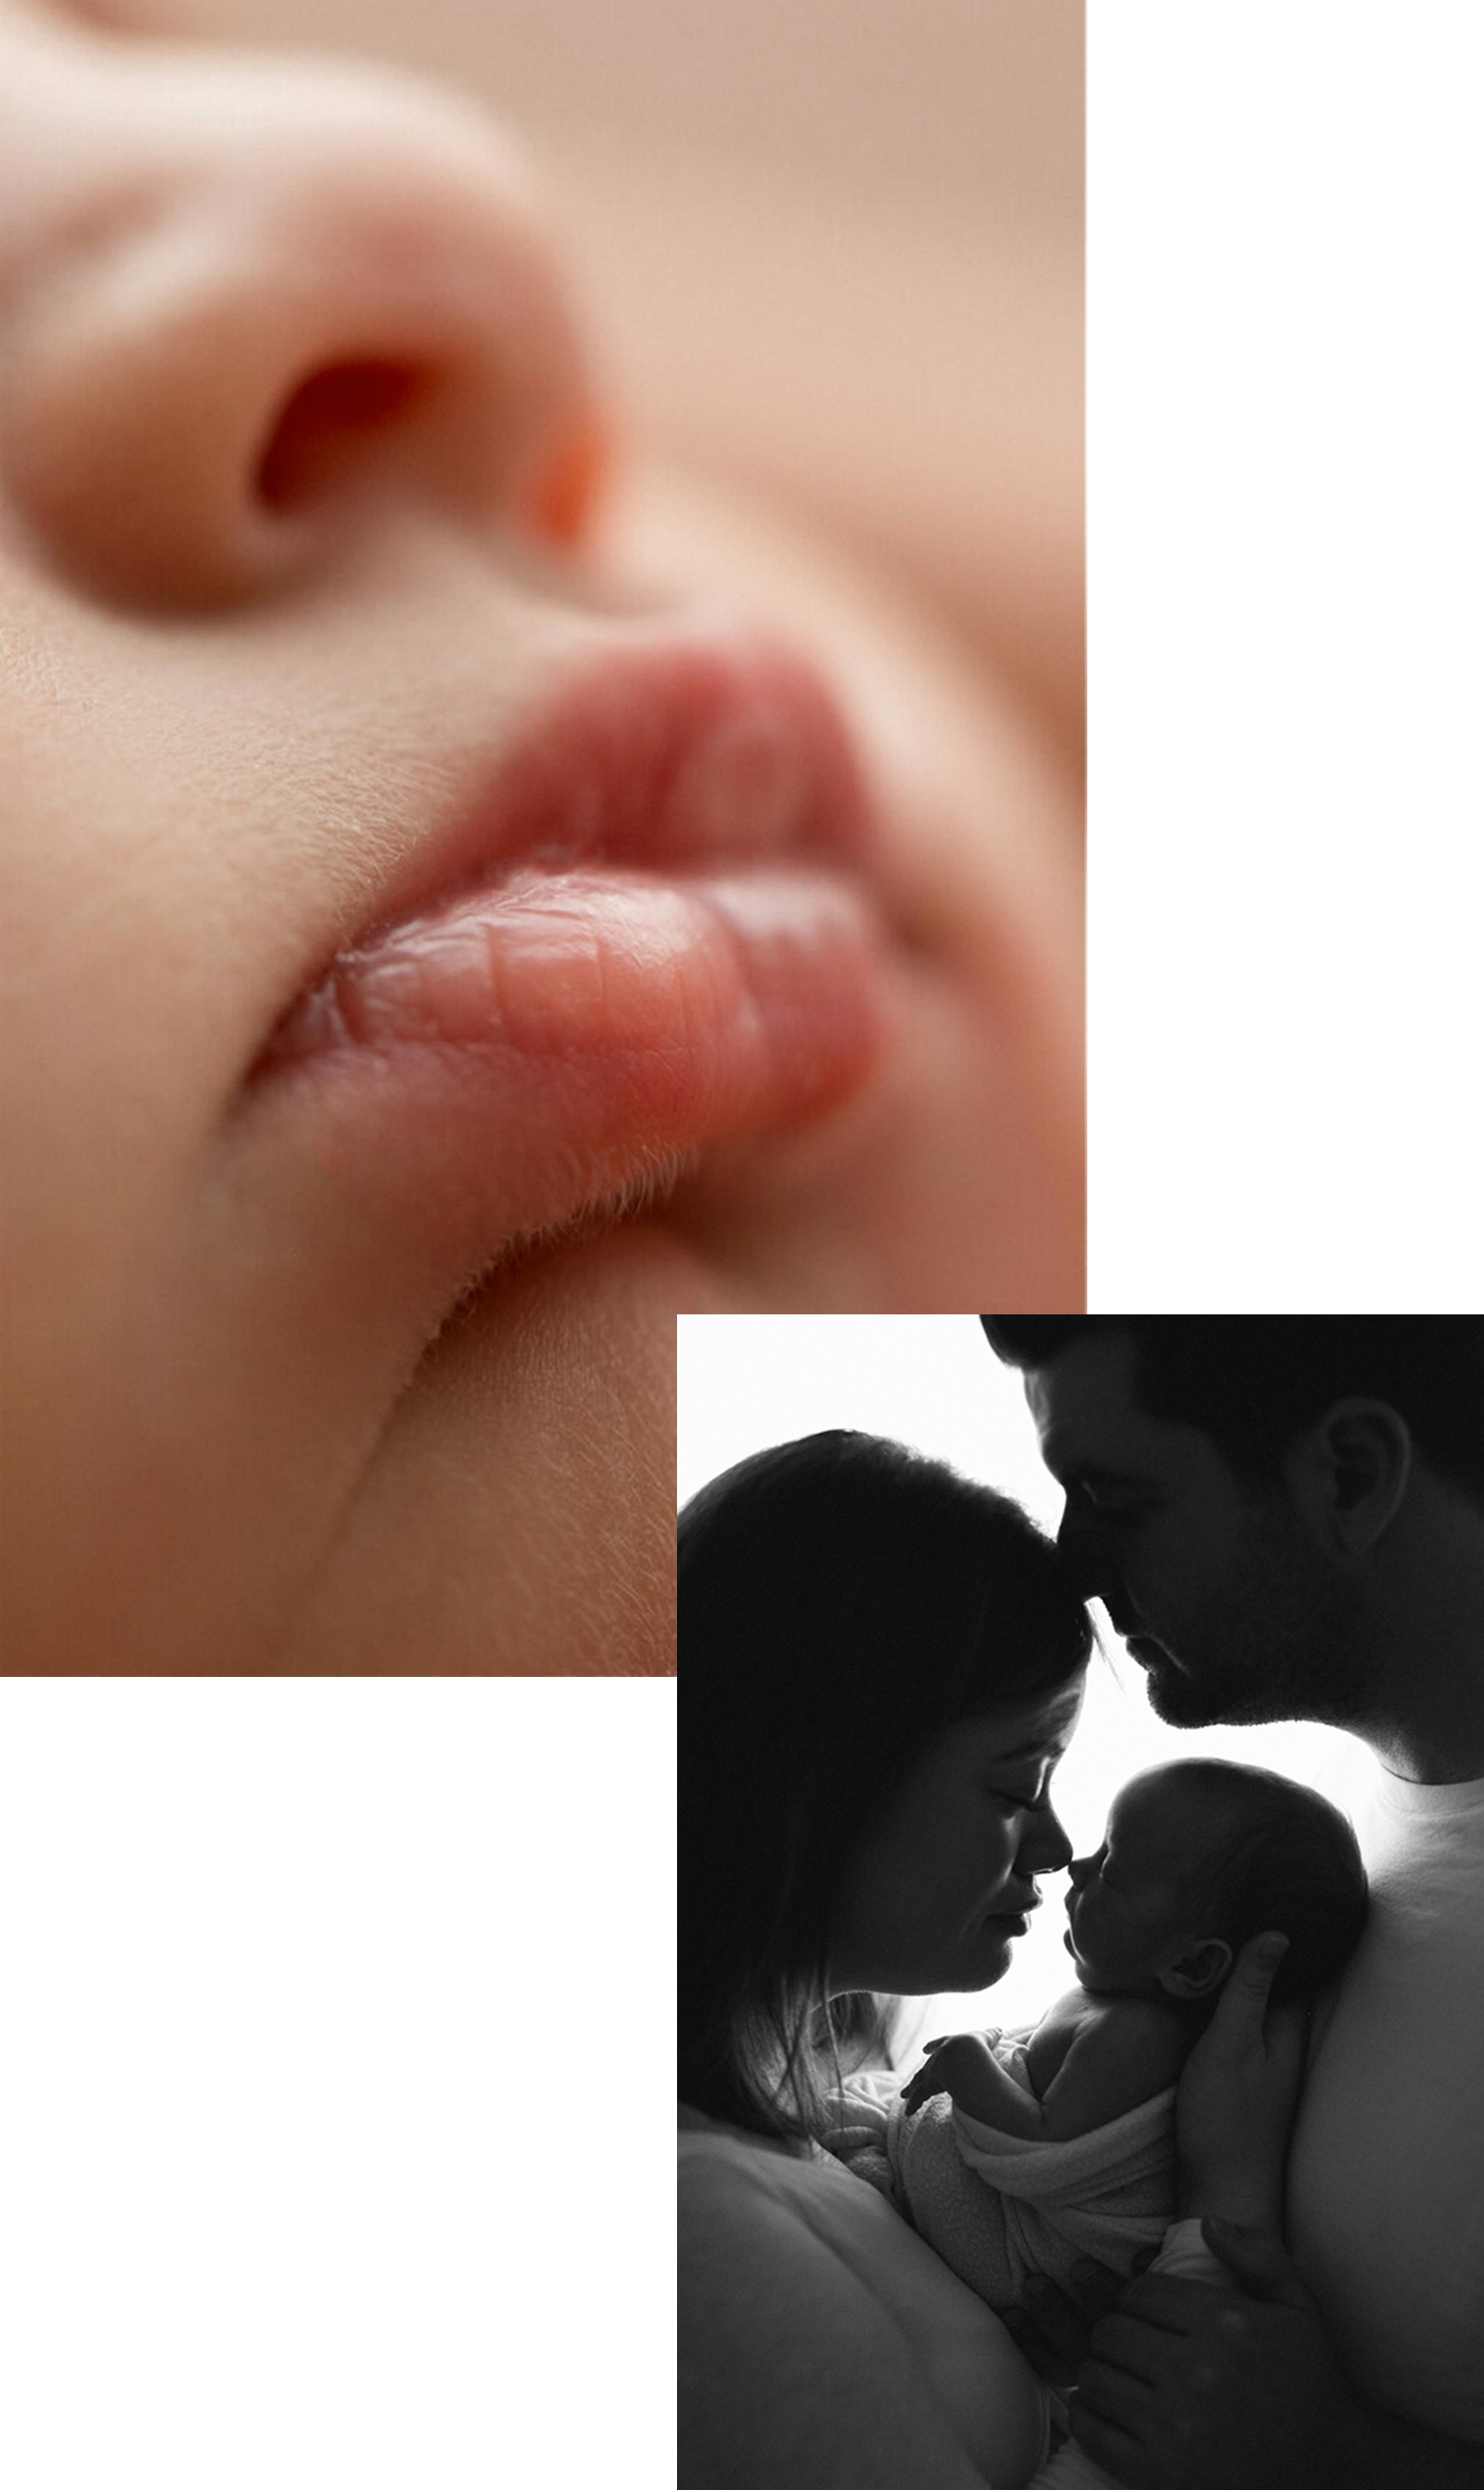 A family admire their newborn baby in Kristen Cook's Melbourne studio, and featured detail close up of newborn lips.